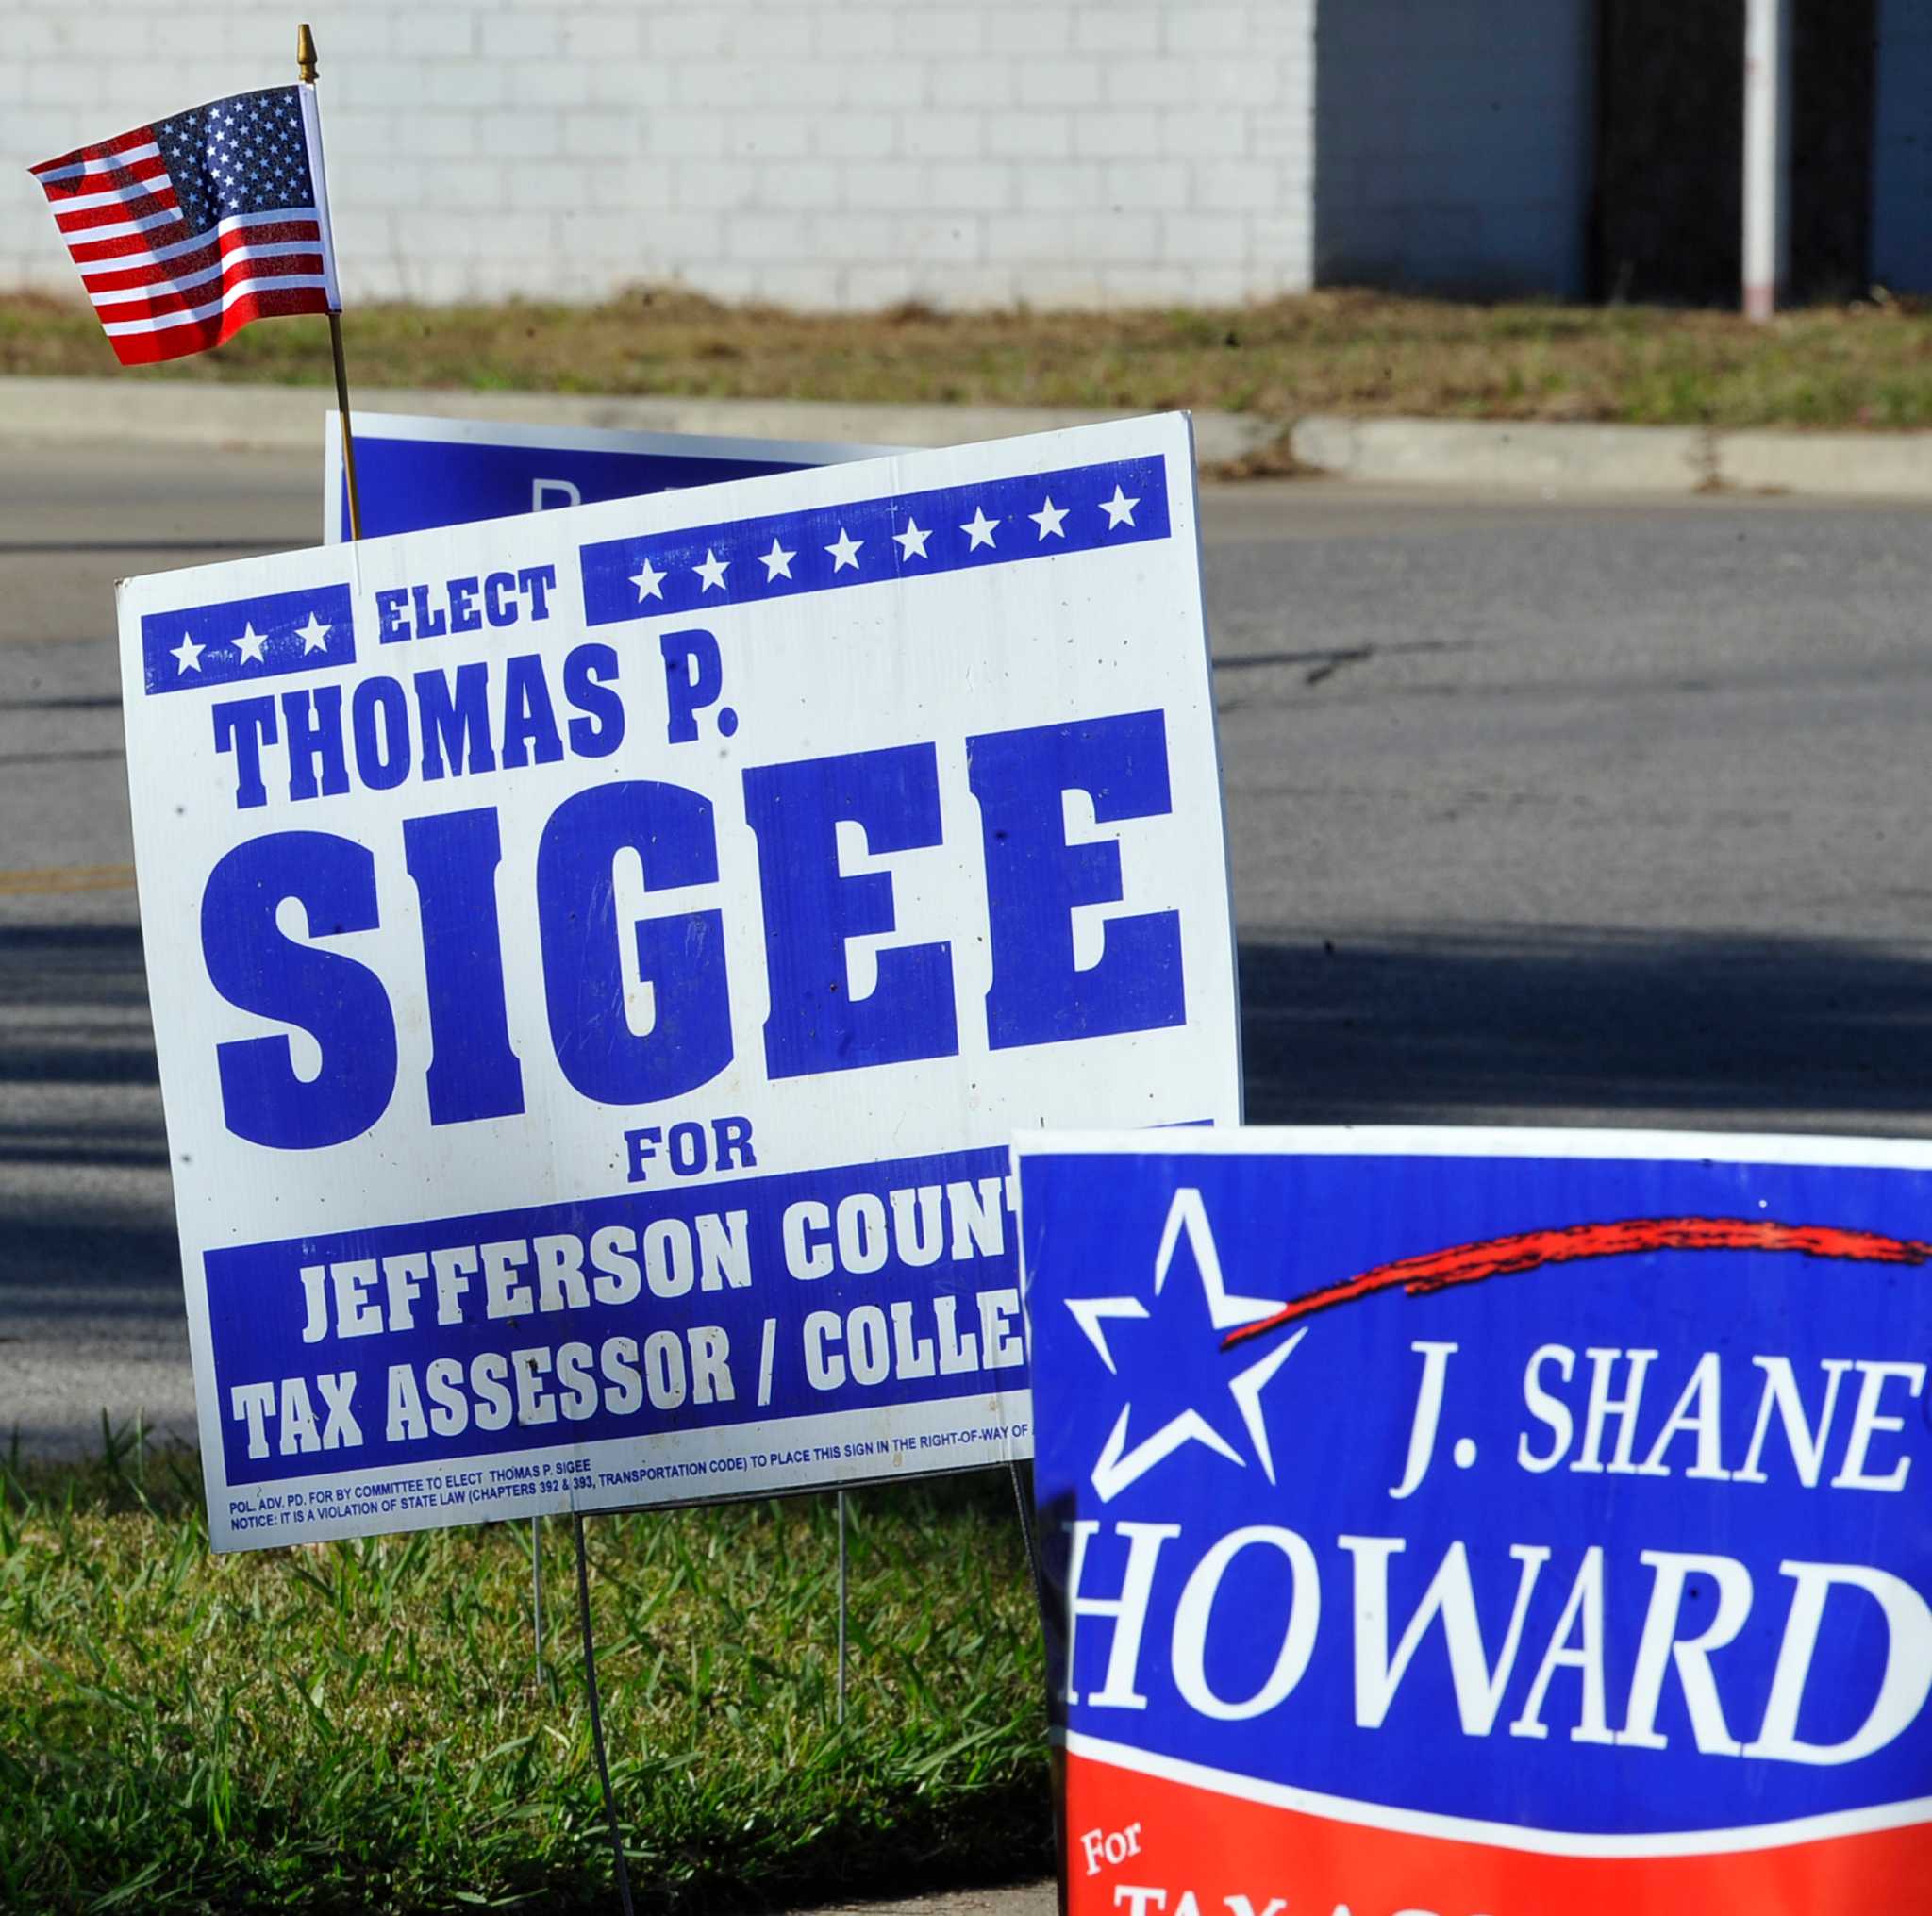 Jefferson County tax assessorcollector incubent leads with 23 votes